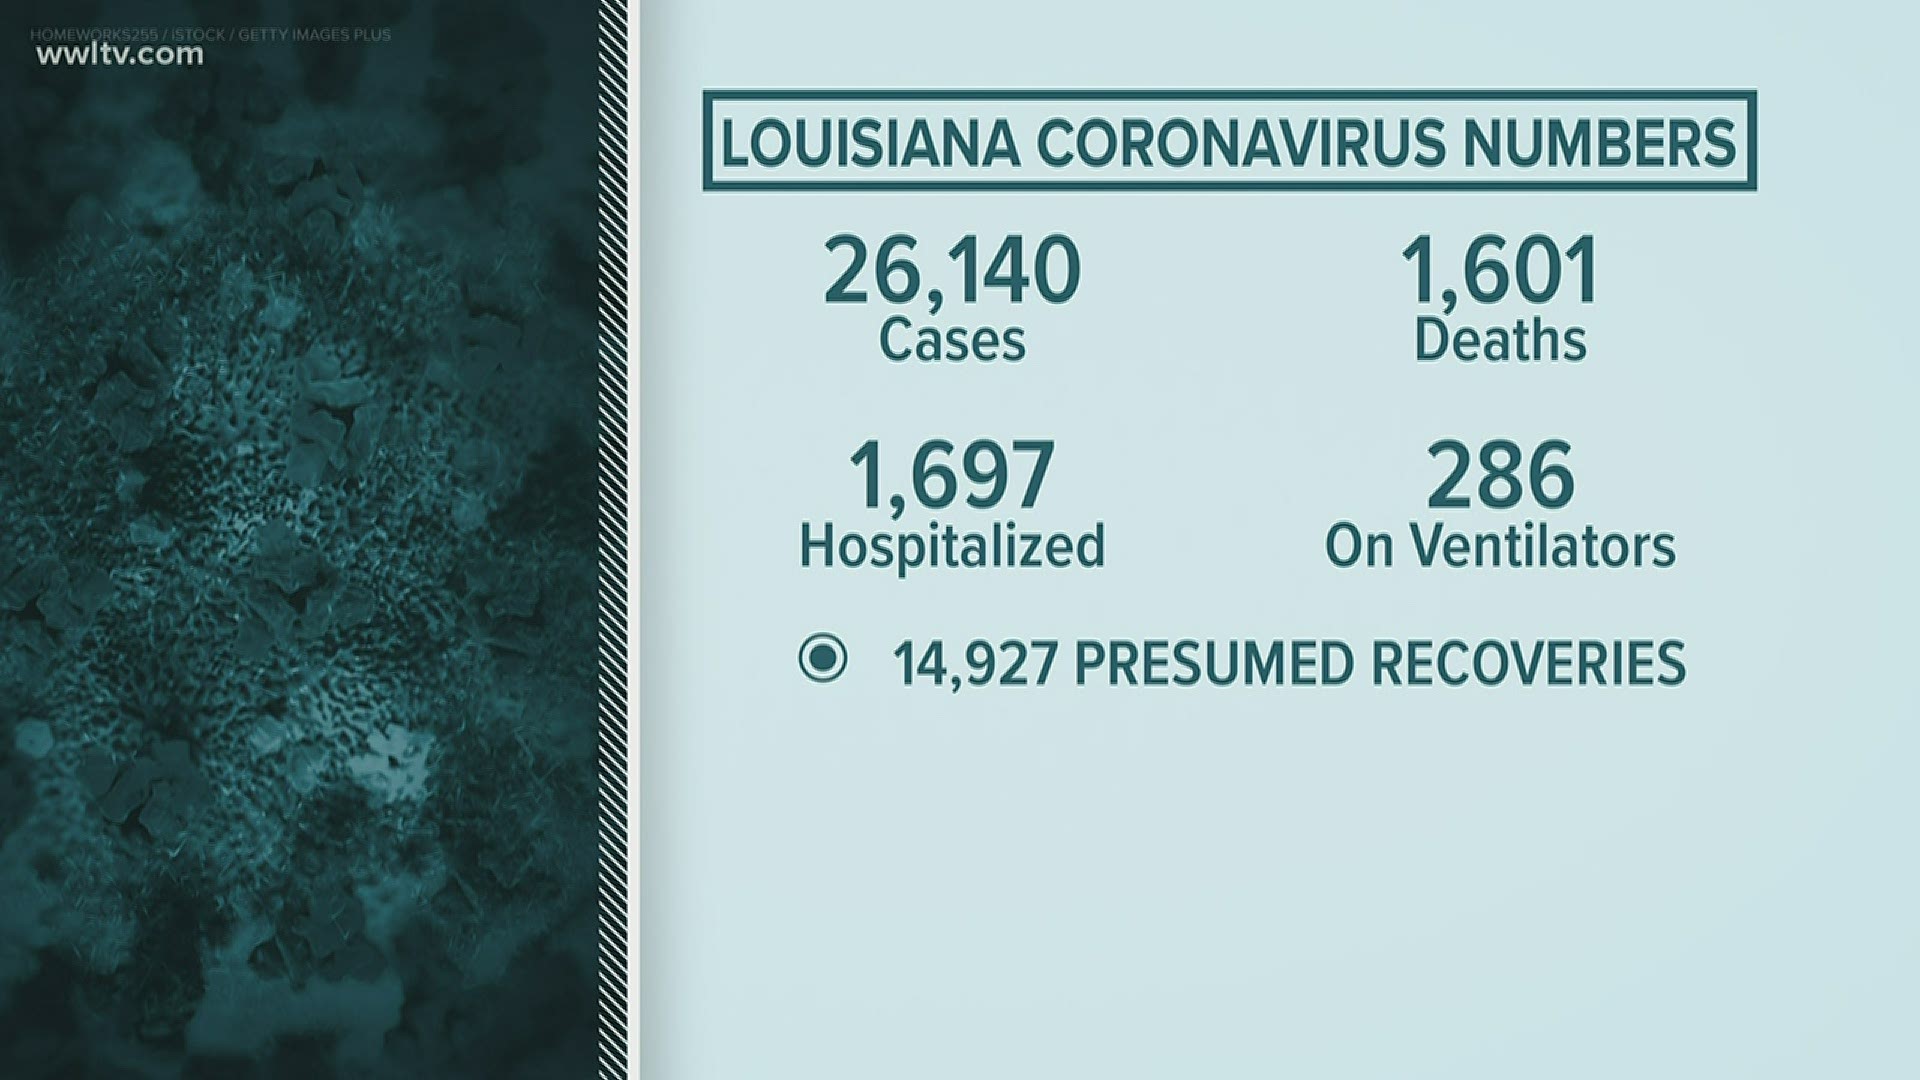 For the first time since the start of the coronavirus outbreak in Louisiana, the Louisiana Department of Health has been able to put out total recovery numbers.